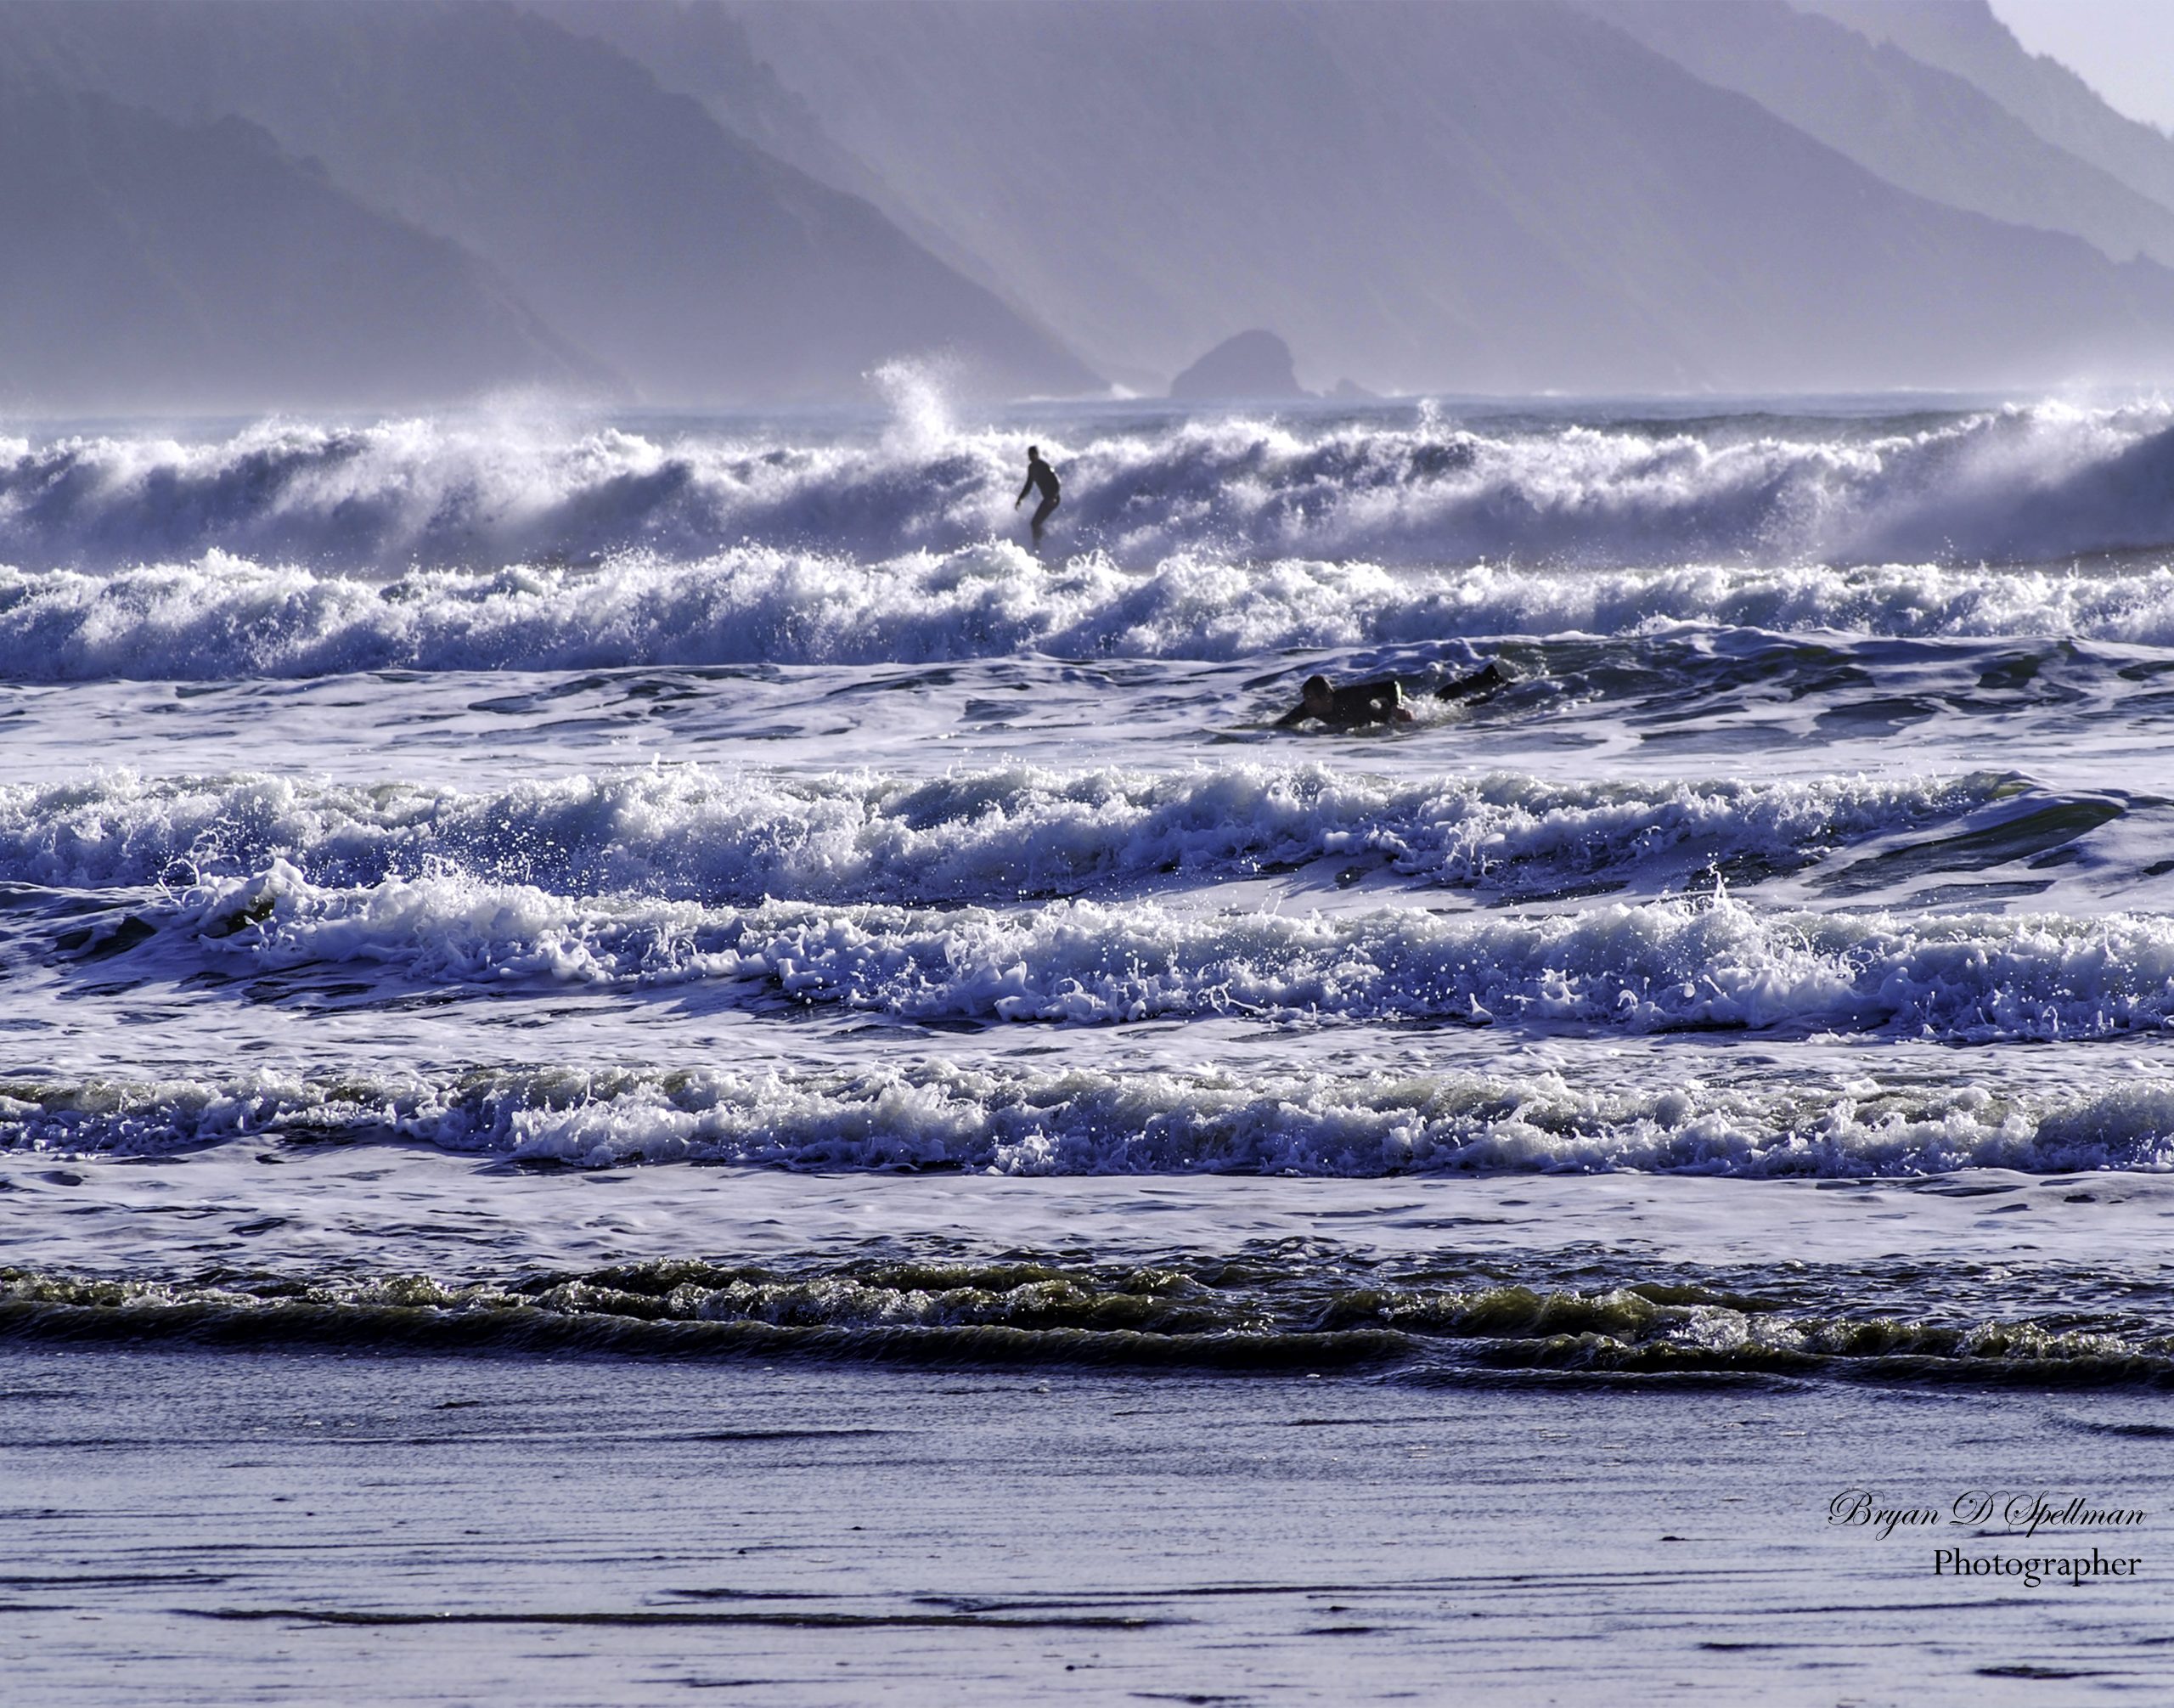 Two surfers braving the waves on a January day in northern California